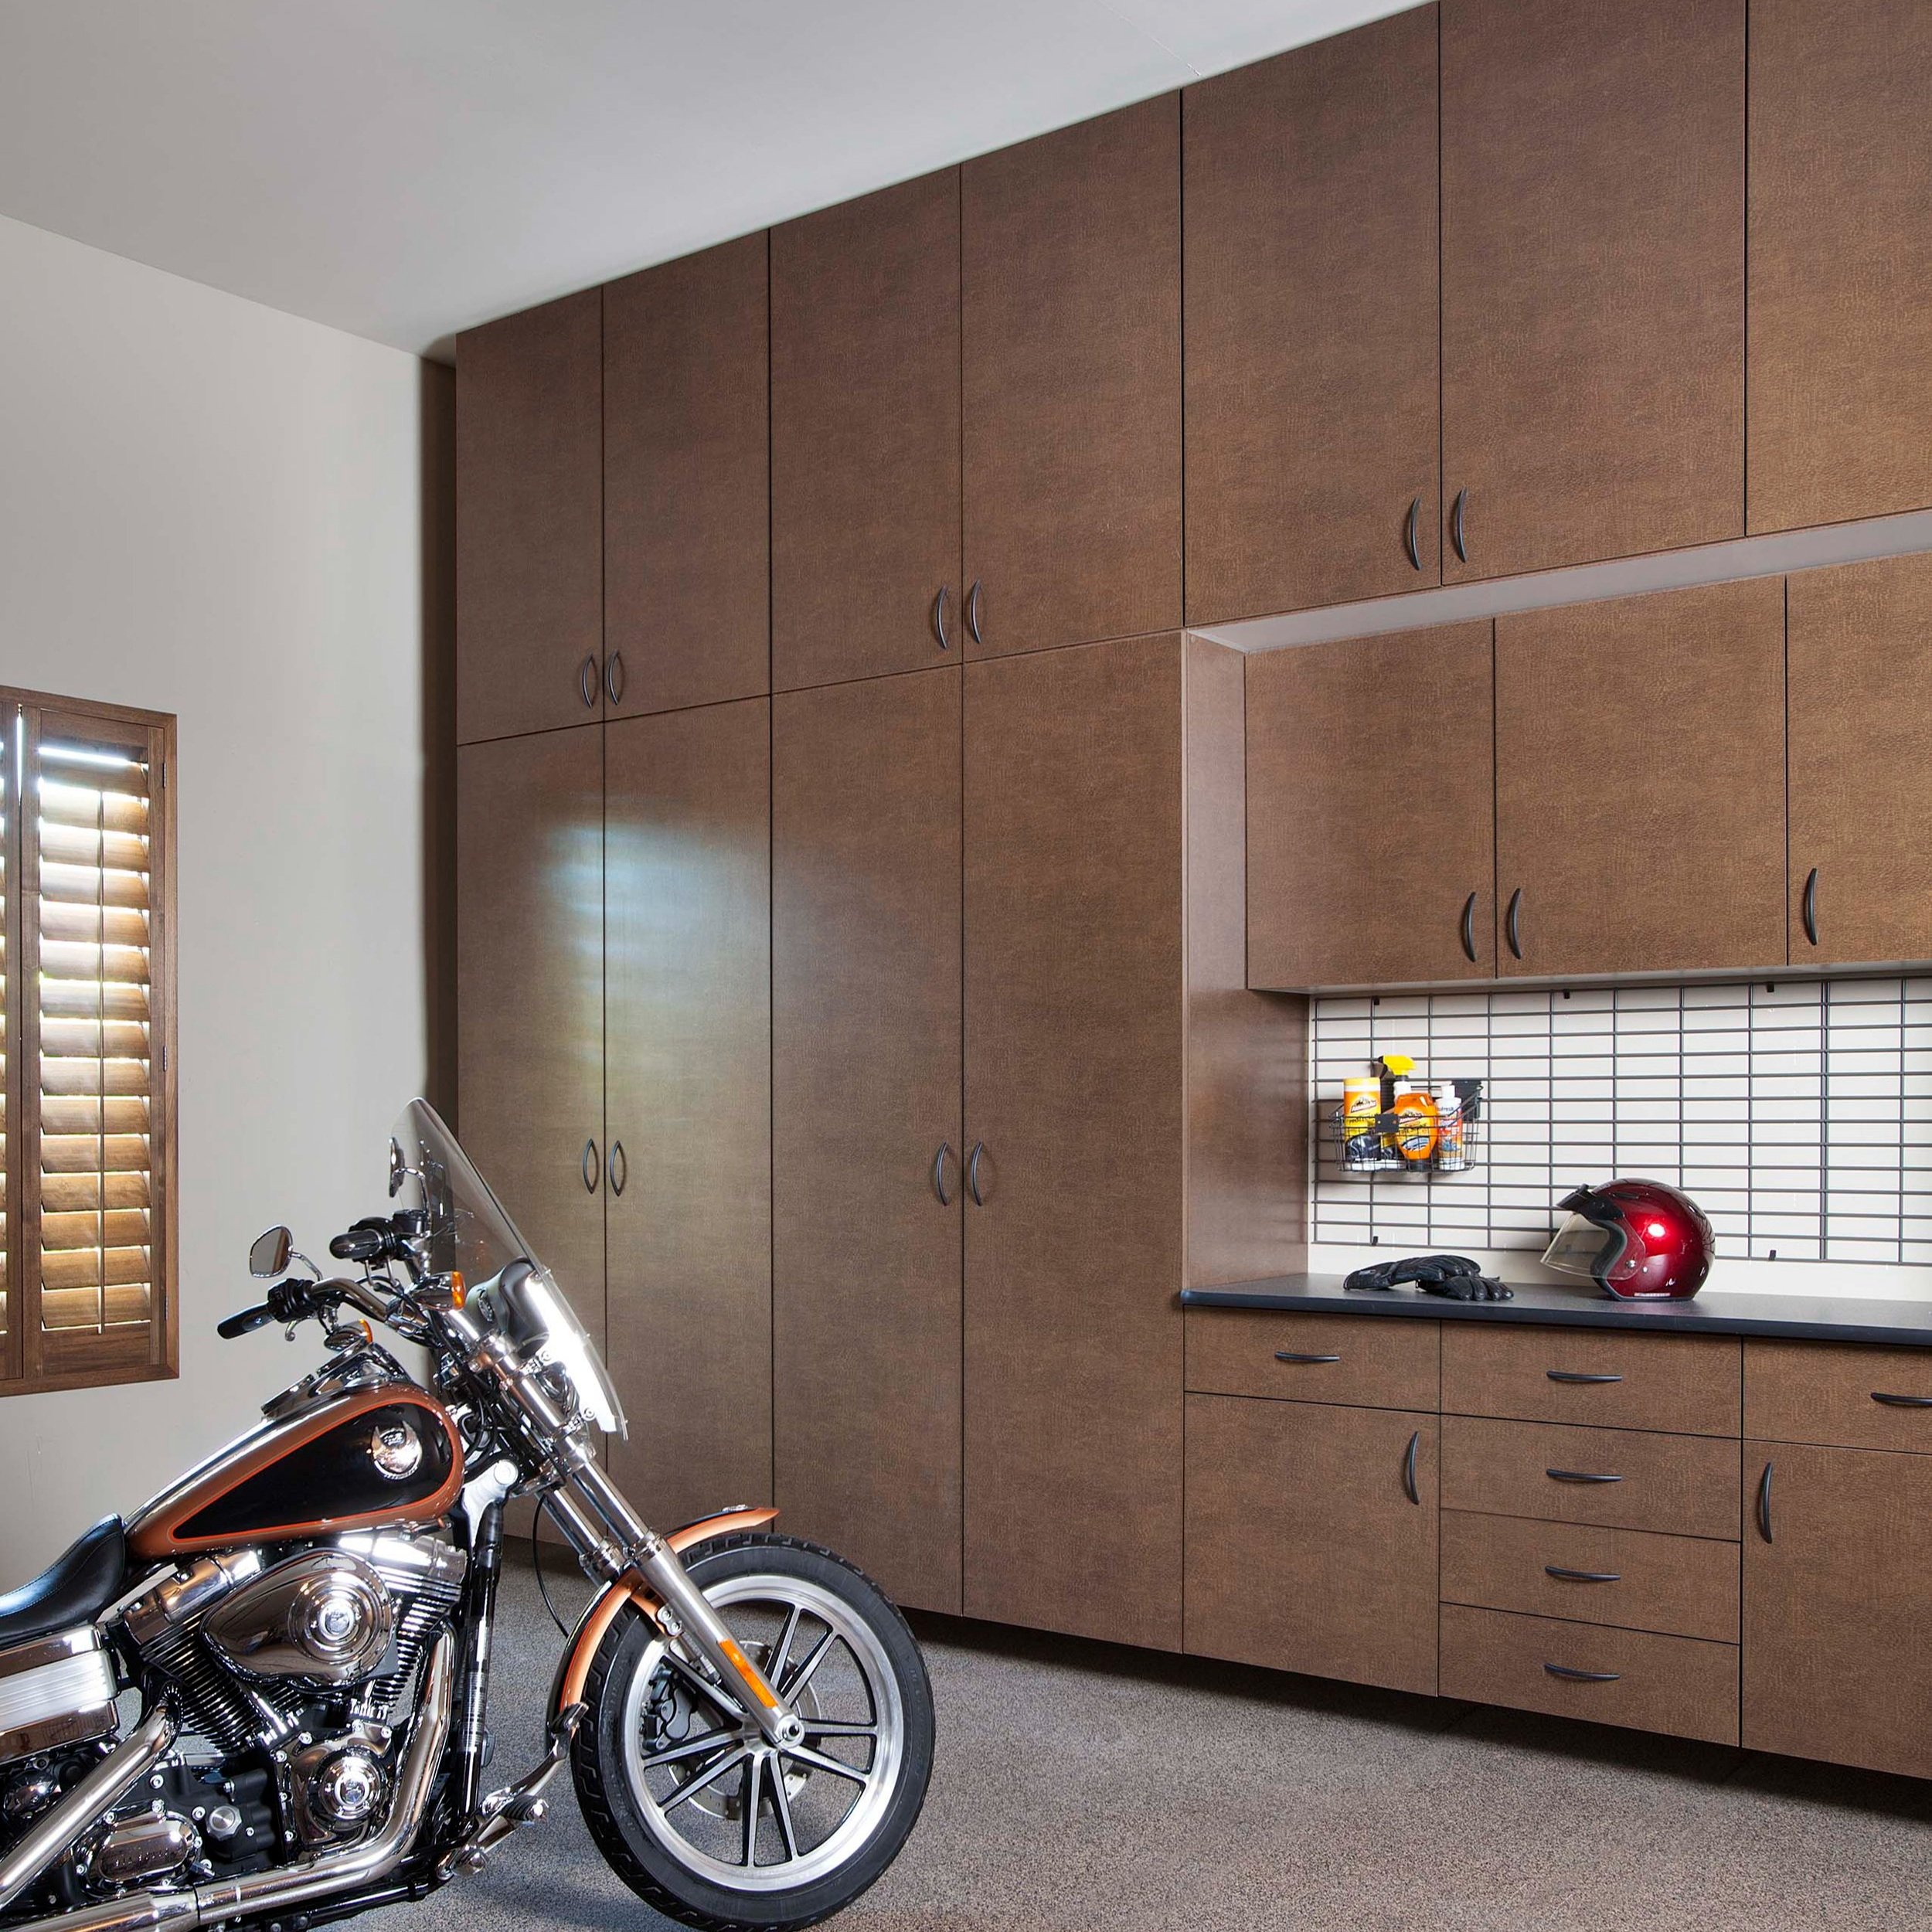 Bronze+Extra+Tall+Cabinets-Inset+Workbench-Motorcycle-Mojave+Floor-Costa+May+2013.jpg